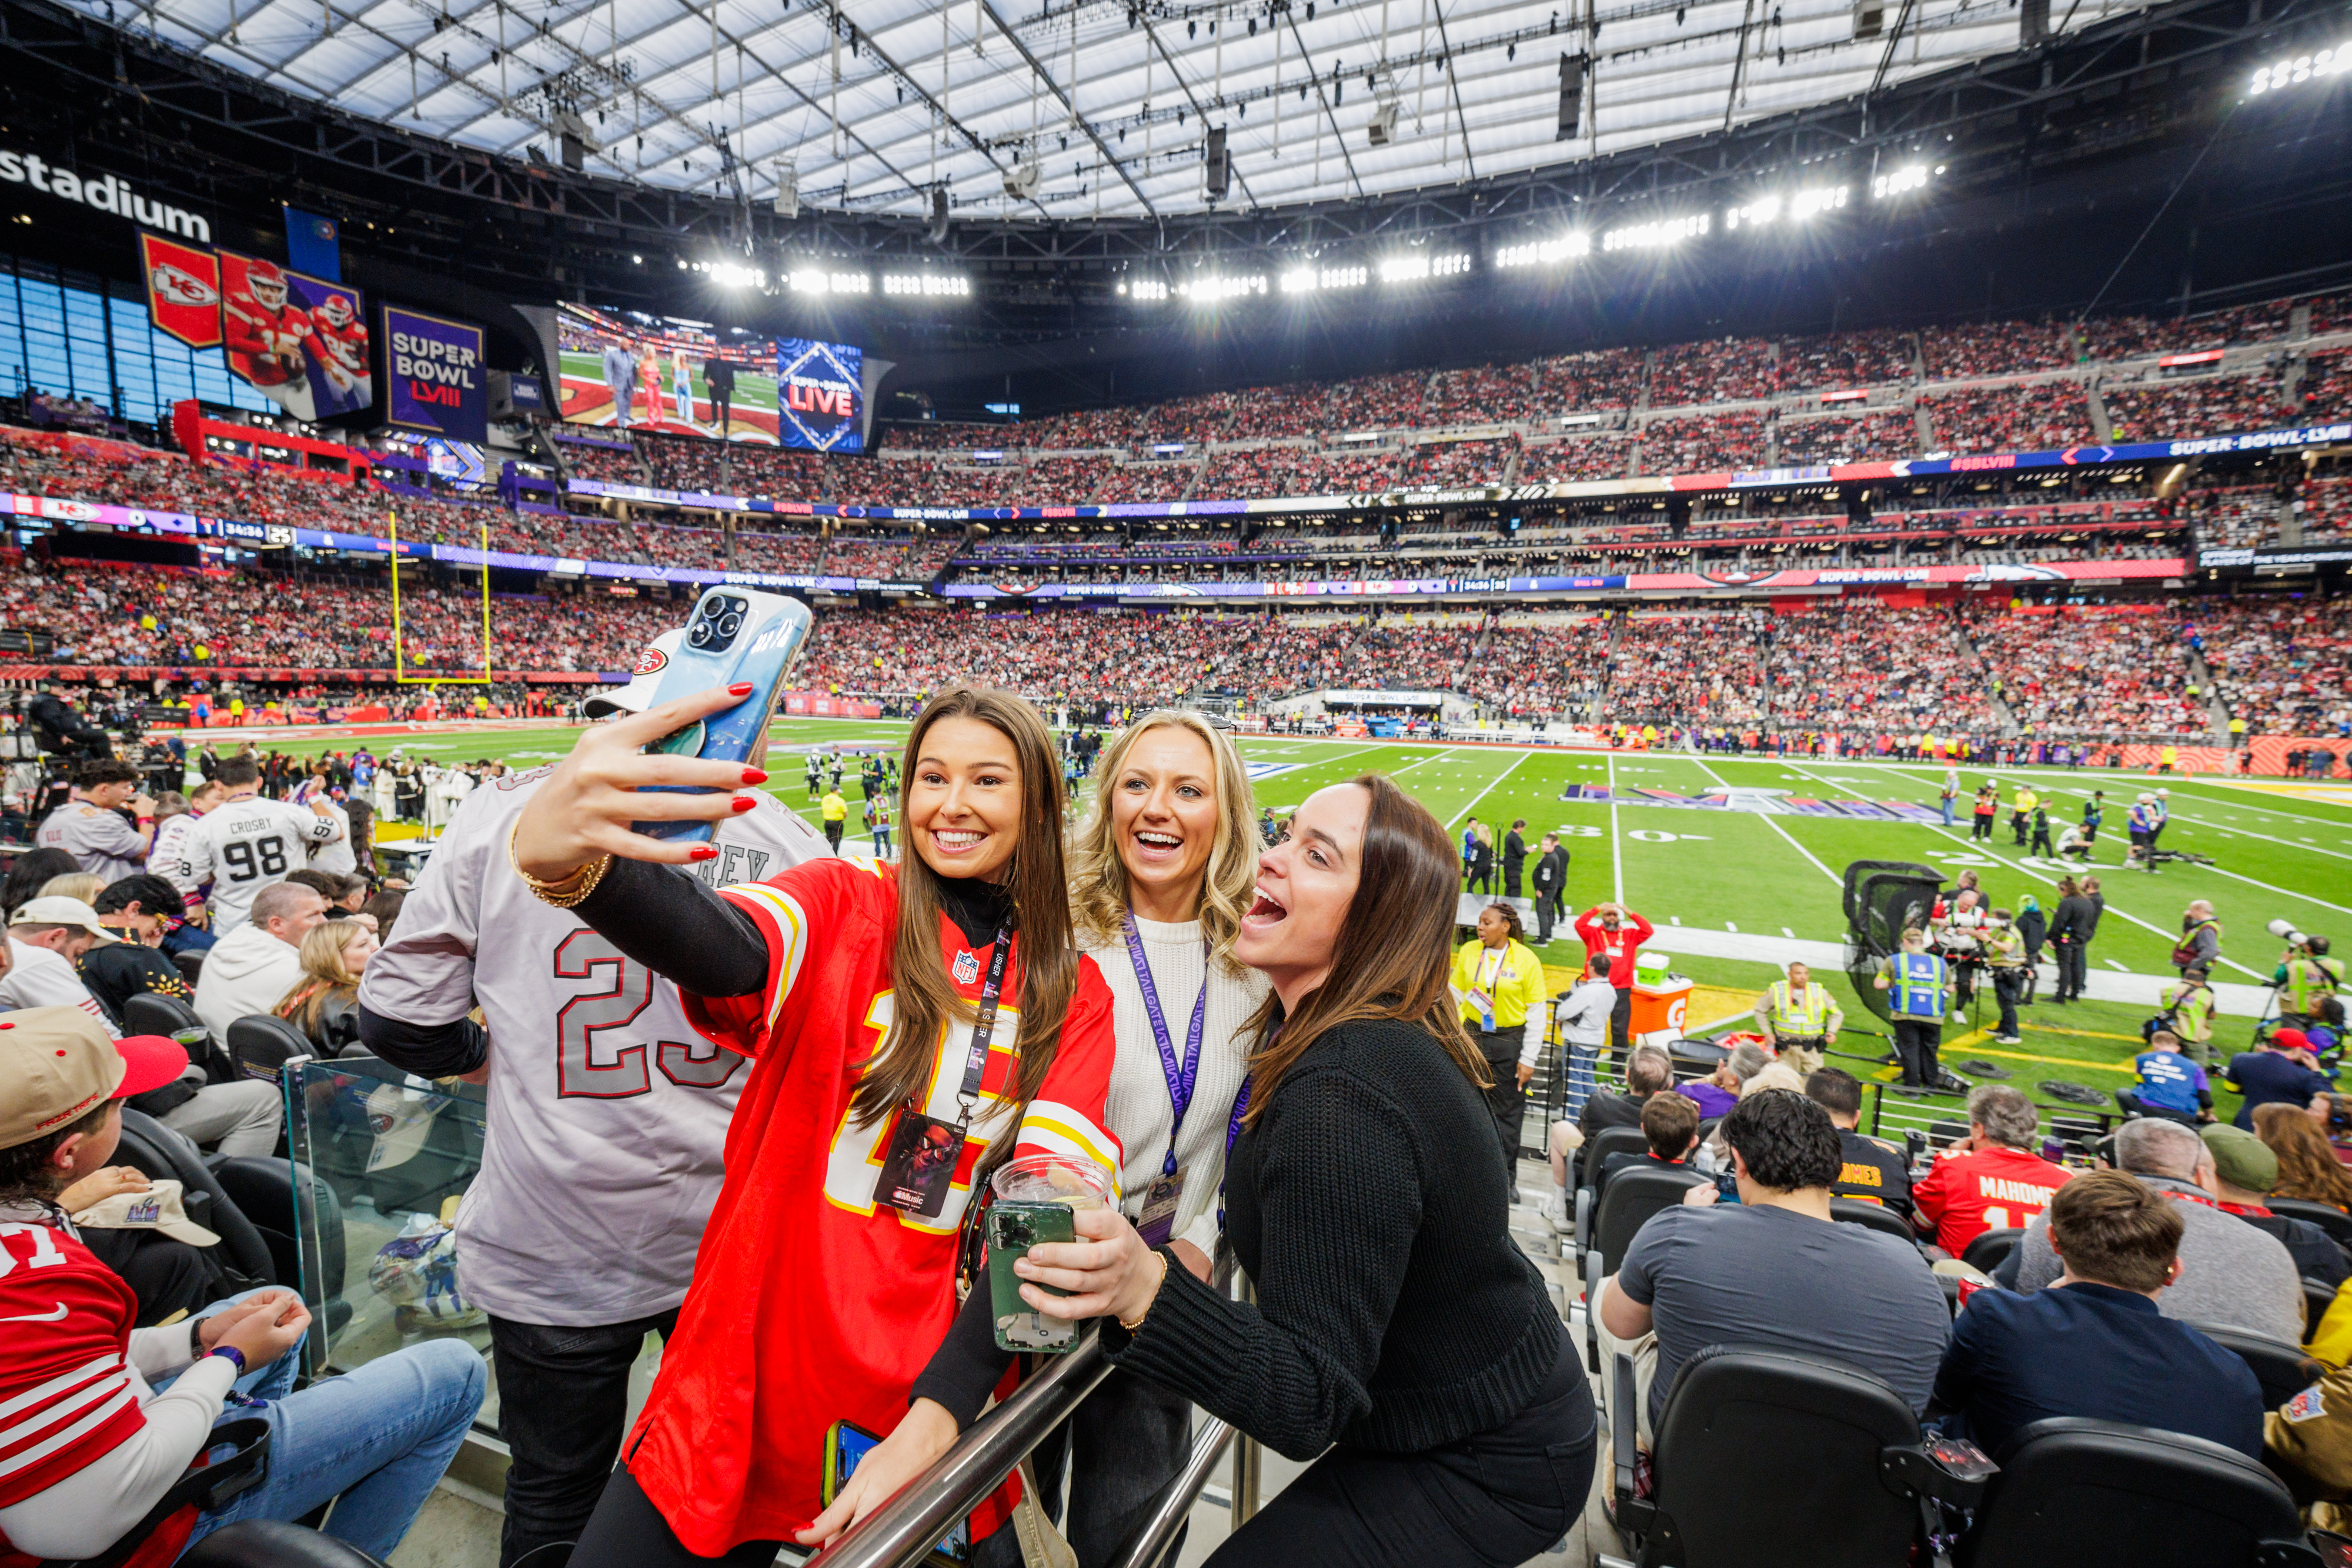 Three people taking a selfie at a packed sports stadium event